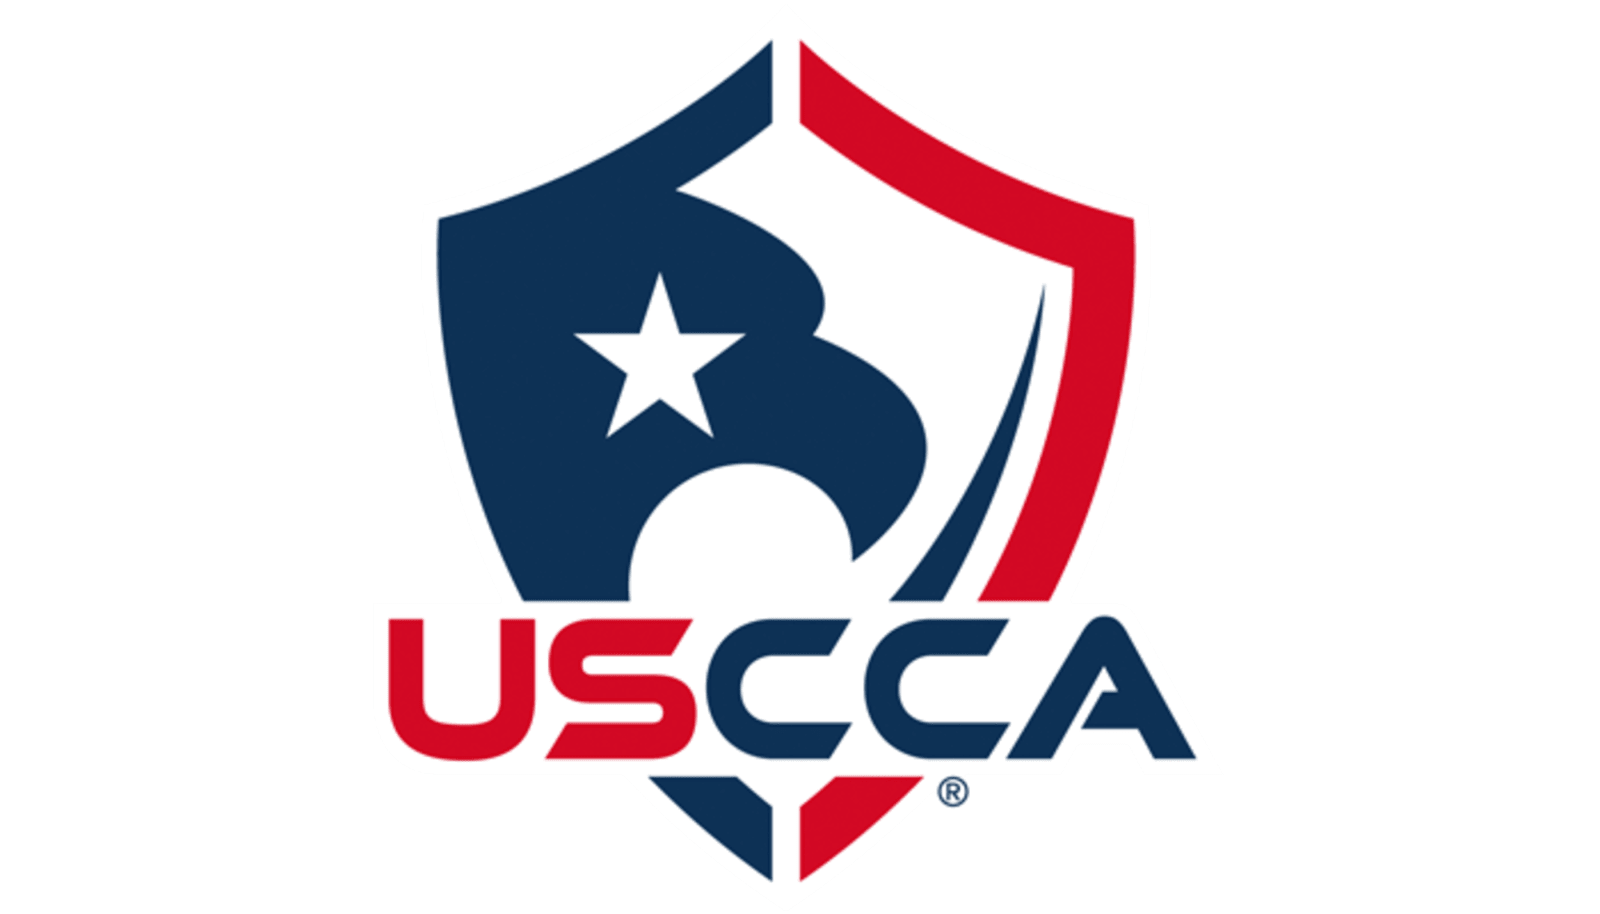 USCCA review